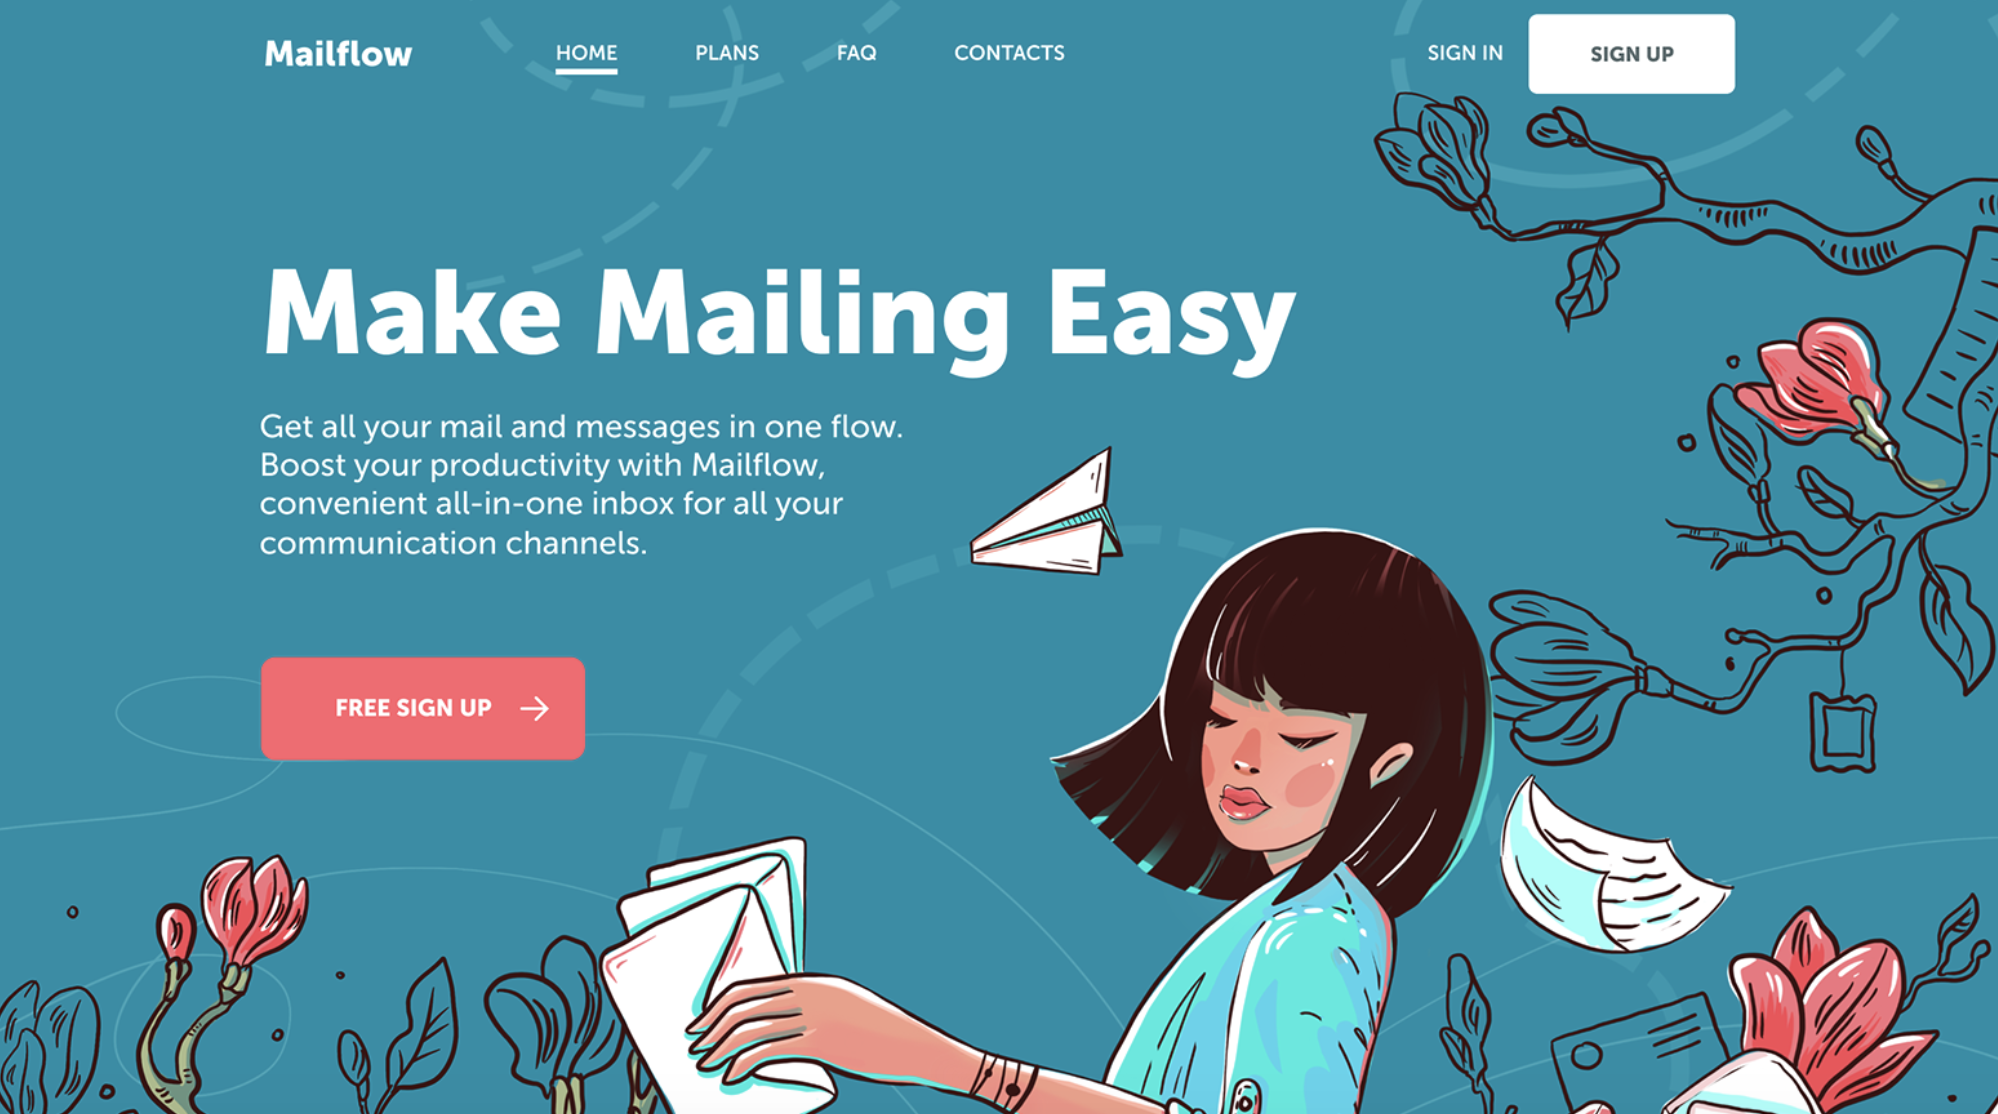 Web Design Inspiration: 20+ Examples of Creative Landing Pages